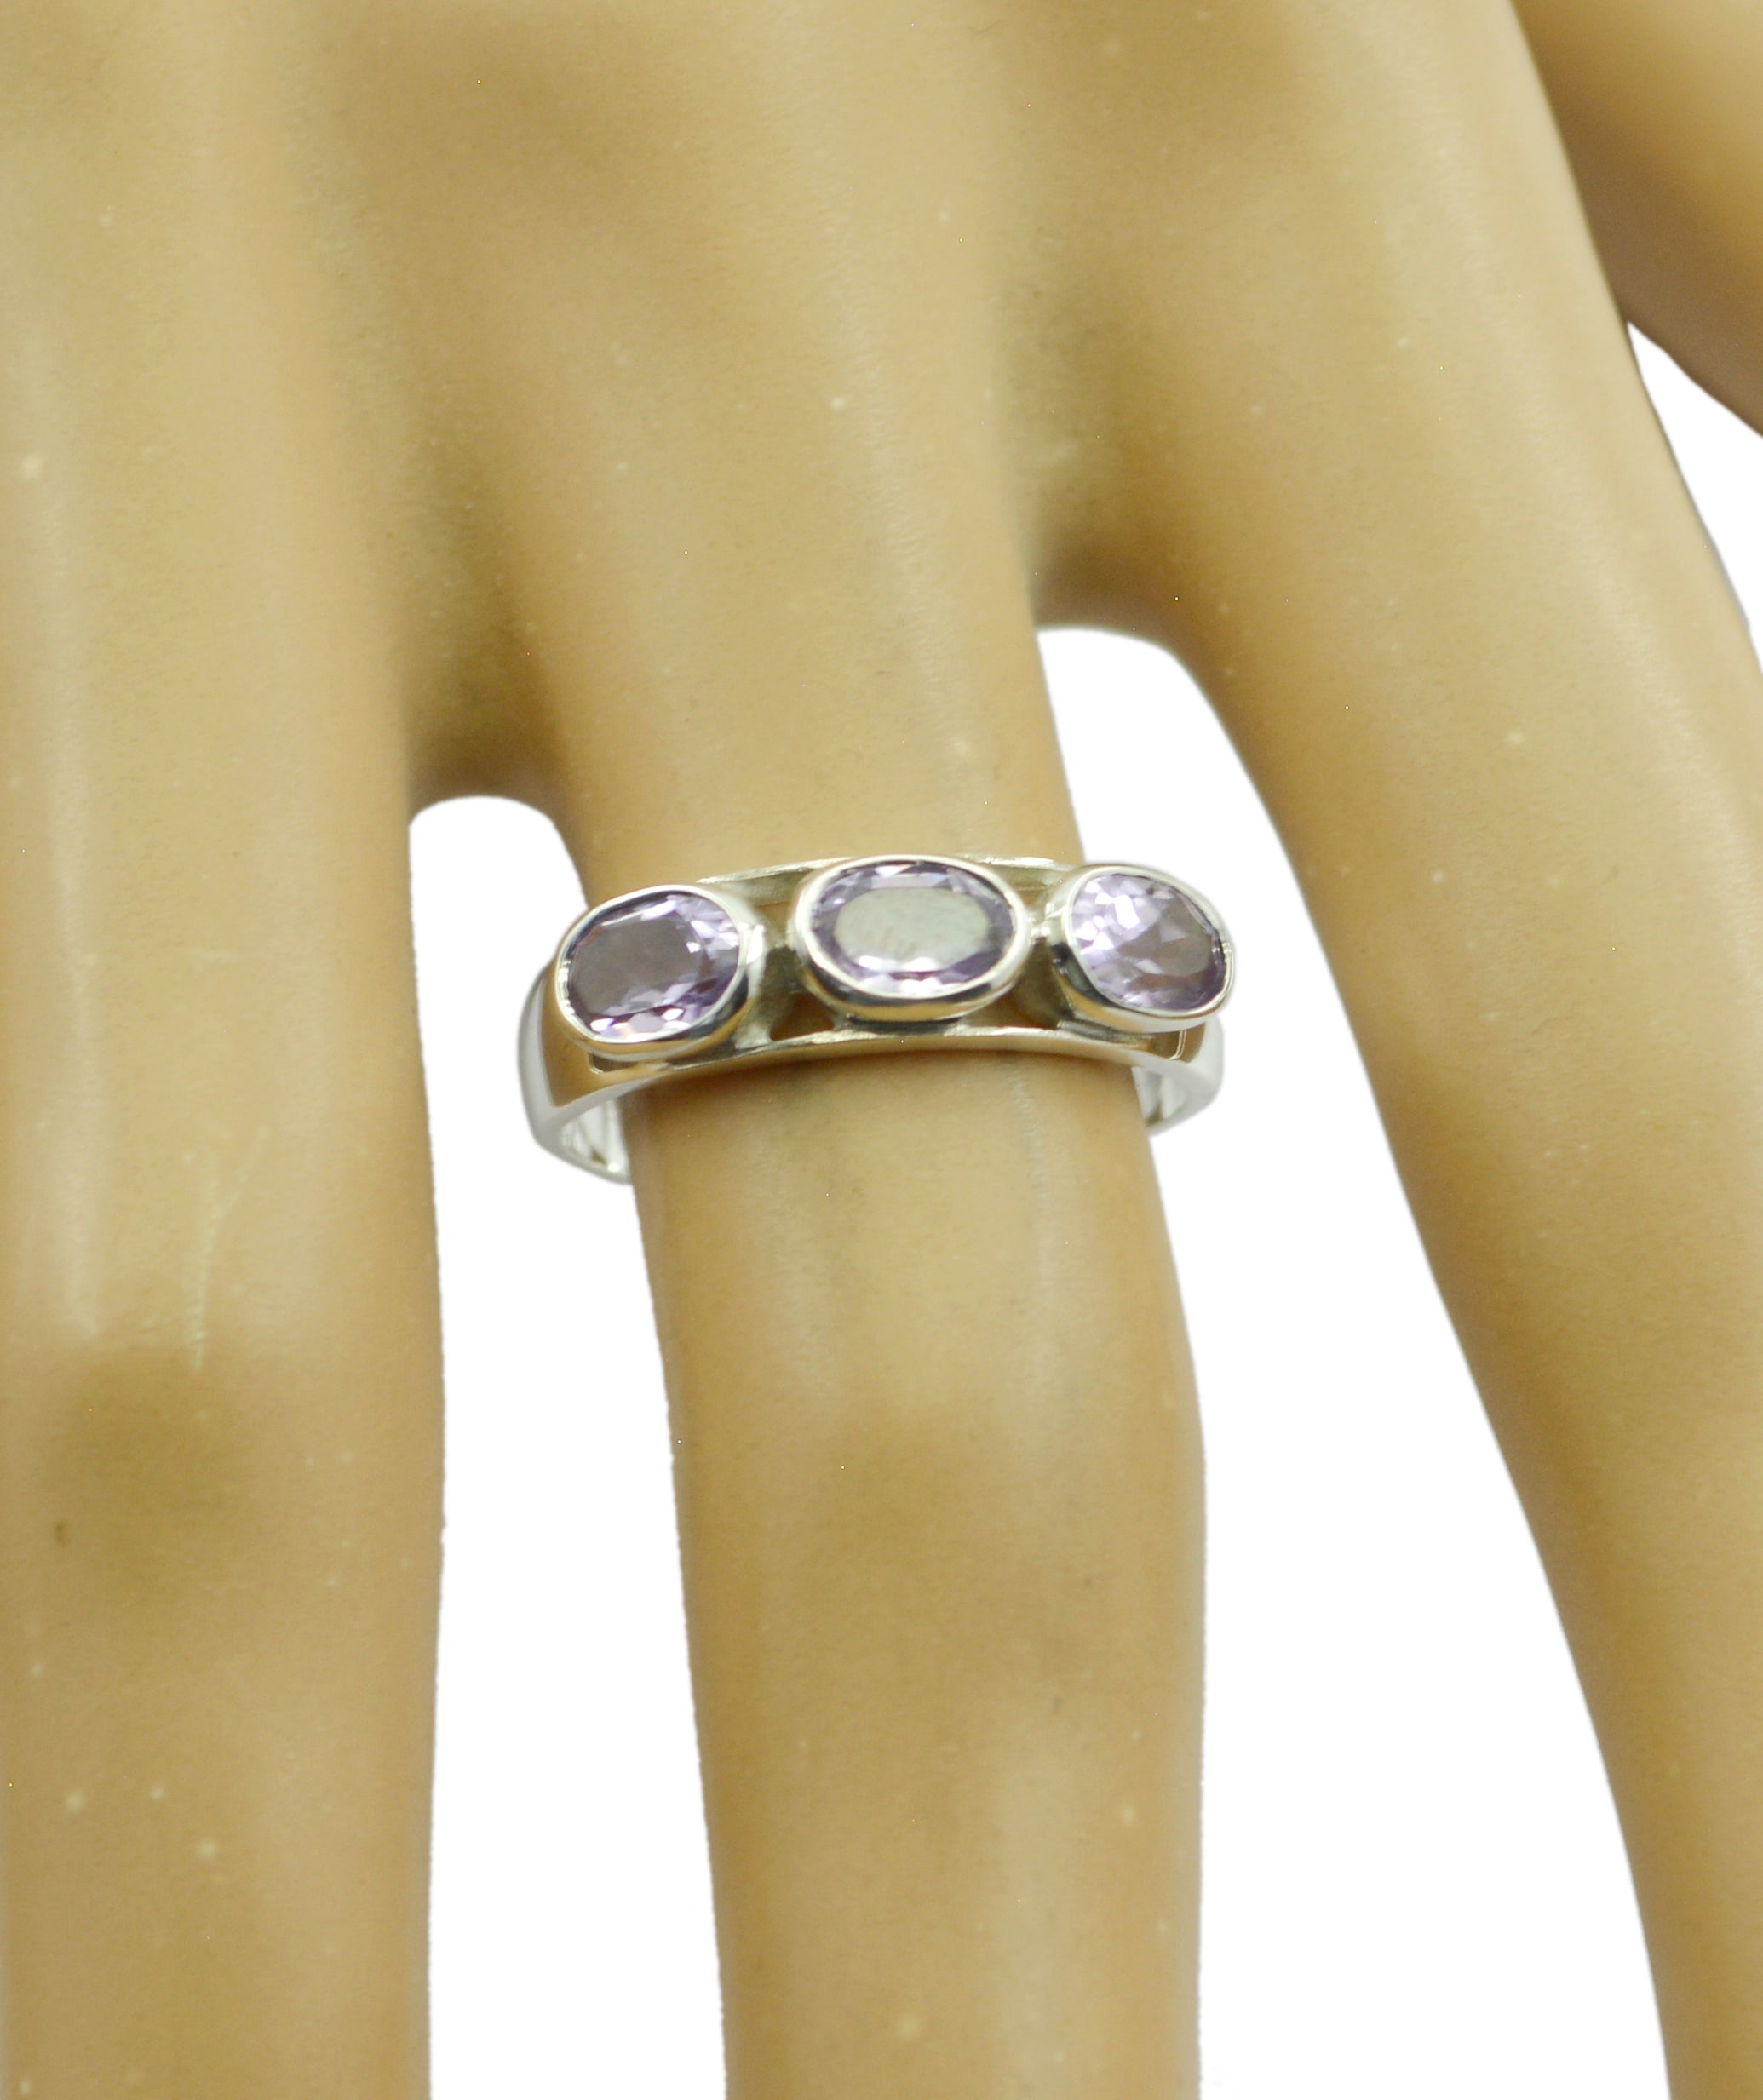 Fascinating Gemstone Amethyst Solid Silver Rings Christmas Day Gift